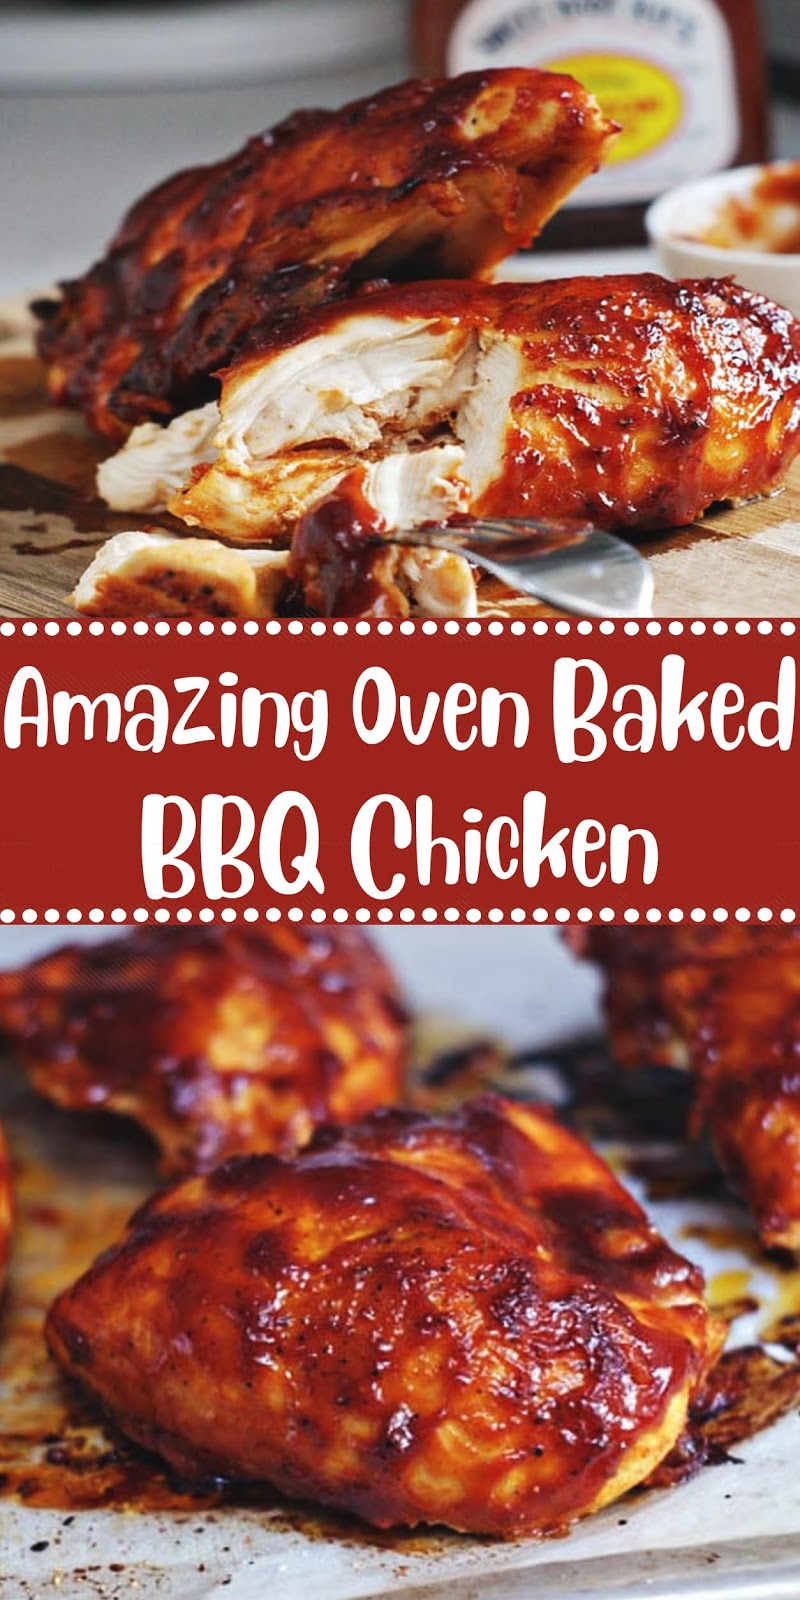 Amazing Oven Baked BBQ Chicken - 8 MOMMY RECIPES